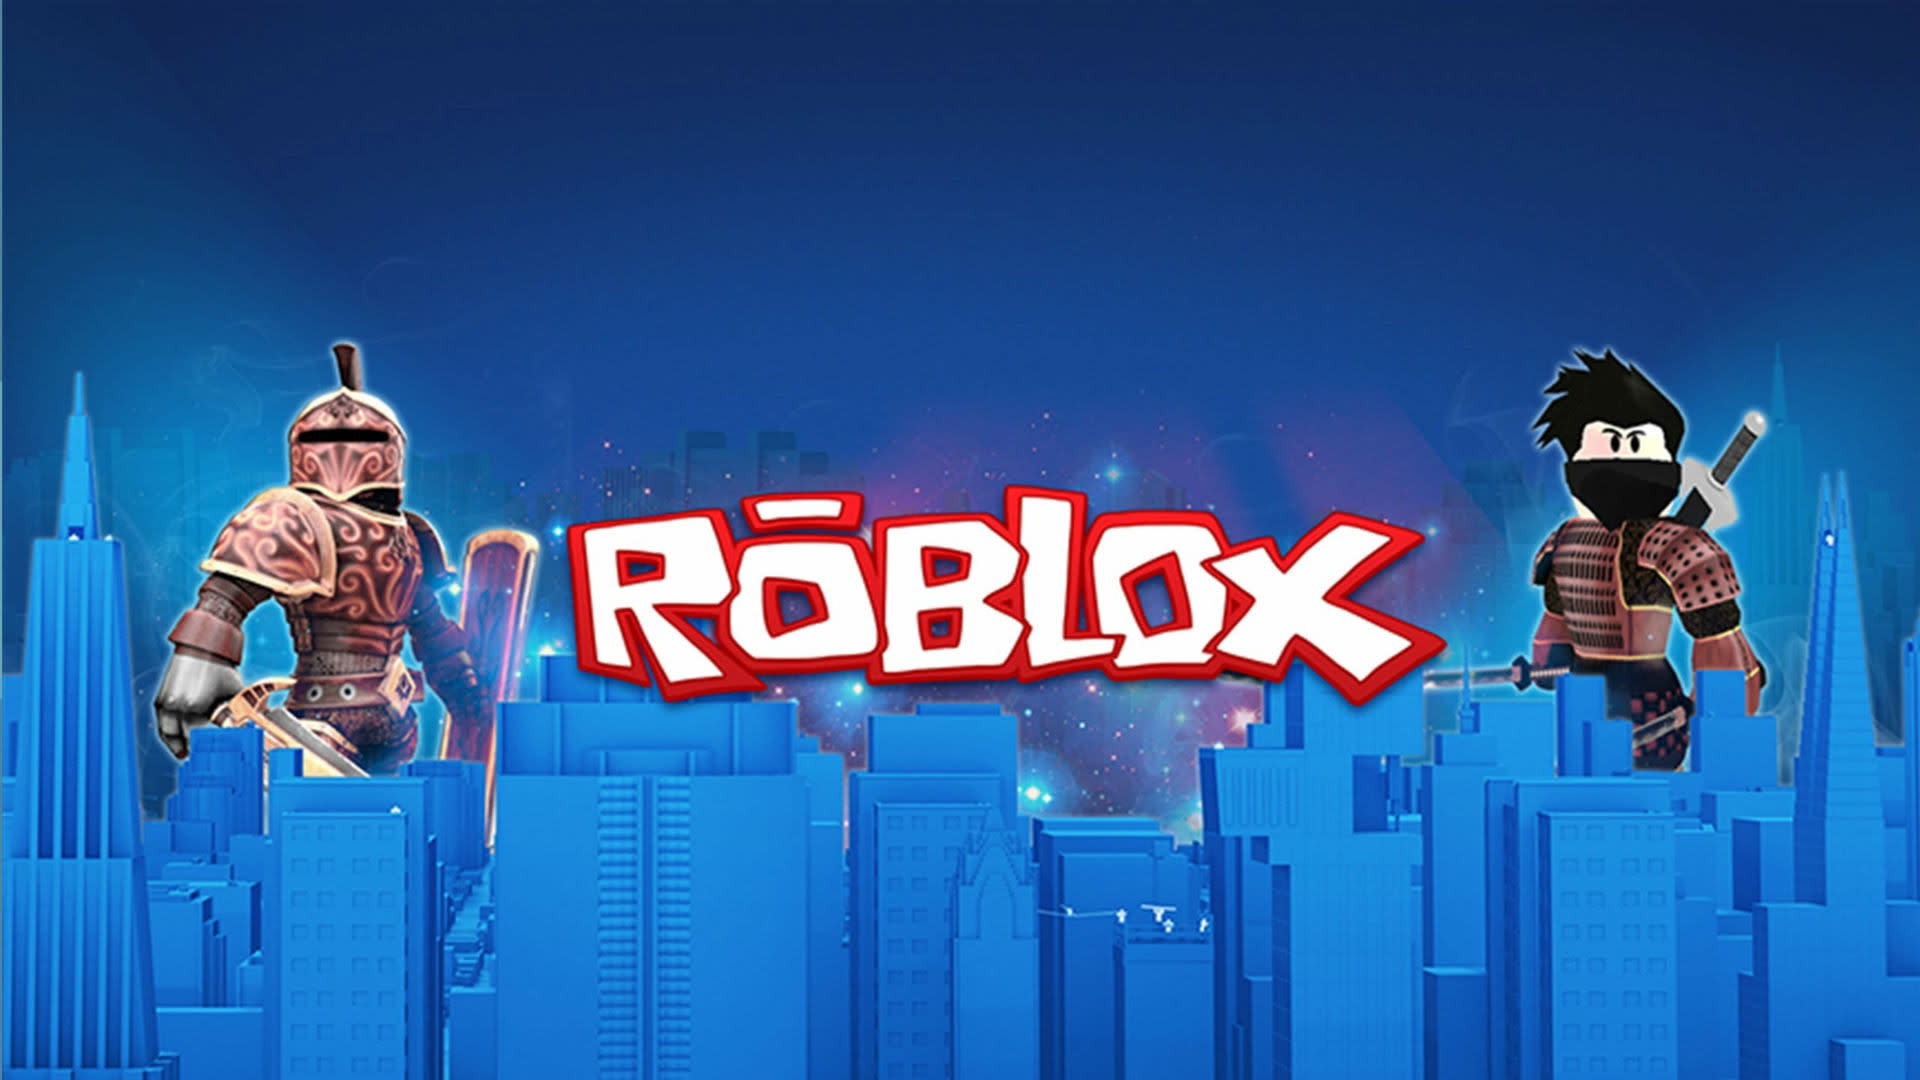 Roblox Enters Vr Space With Cross Platform Support - roblox inflation games